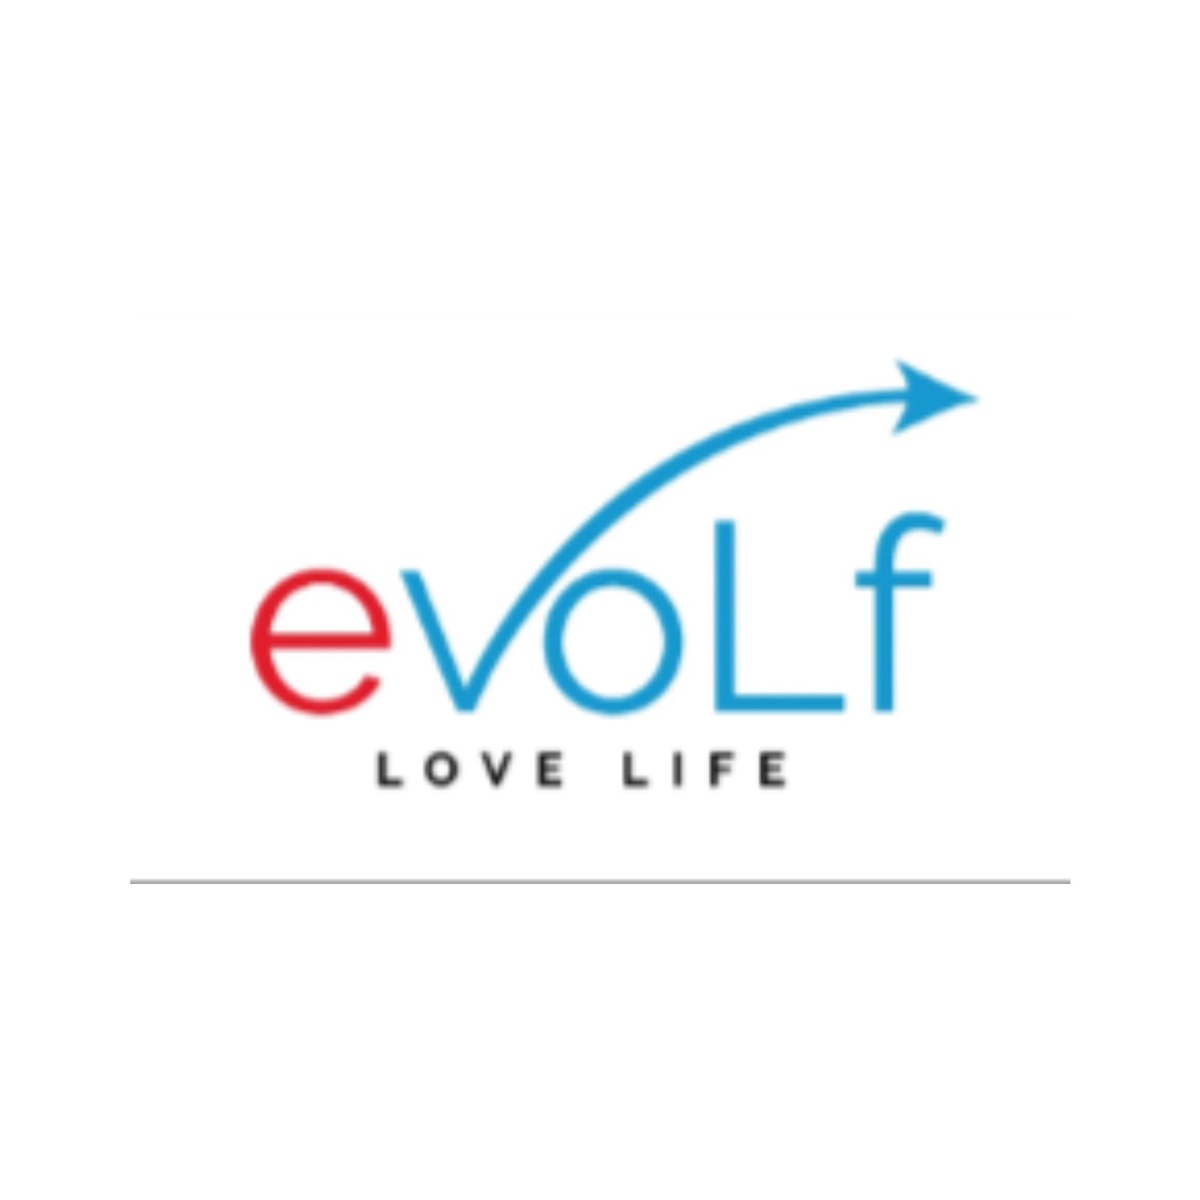 Evolfus: Bringing Joy, Happiness, and Growth with Stainless Steel Grinders